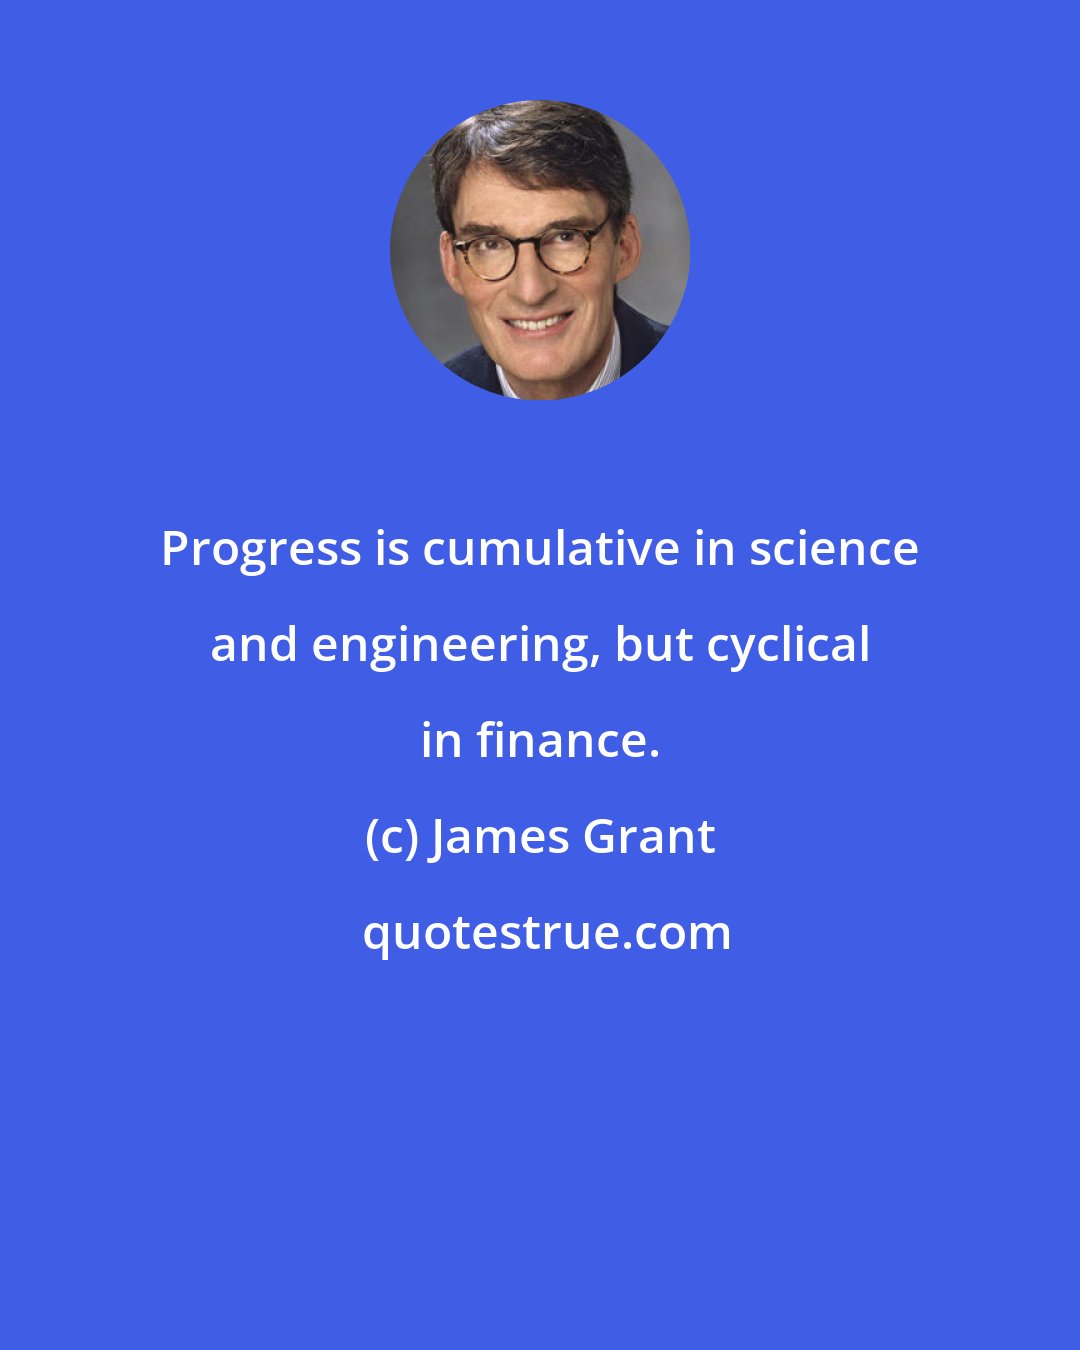 James Grant: Progress is cumulative in science and engineering, but cyclical in finance.